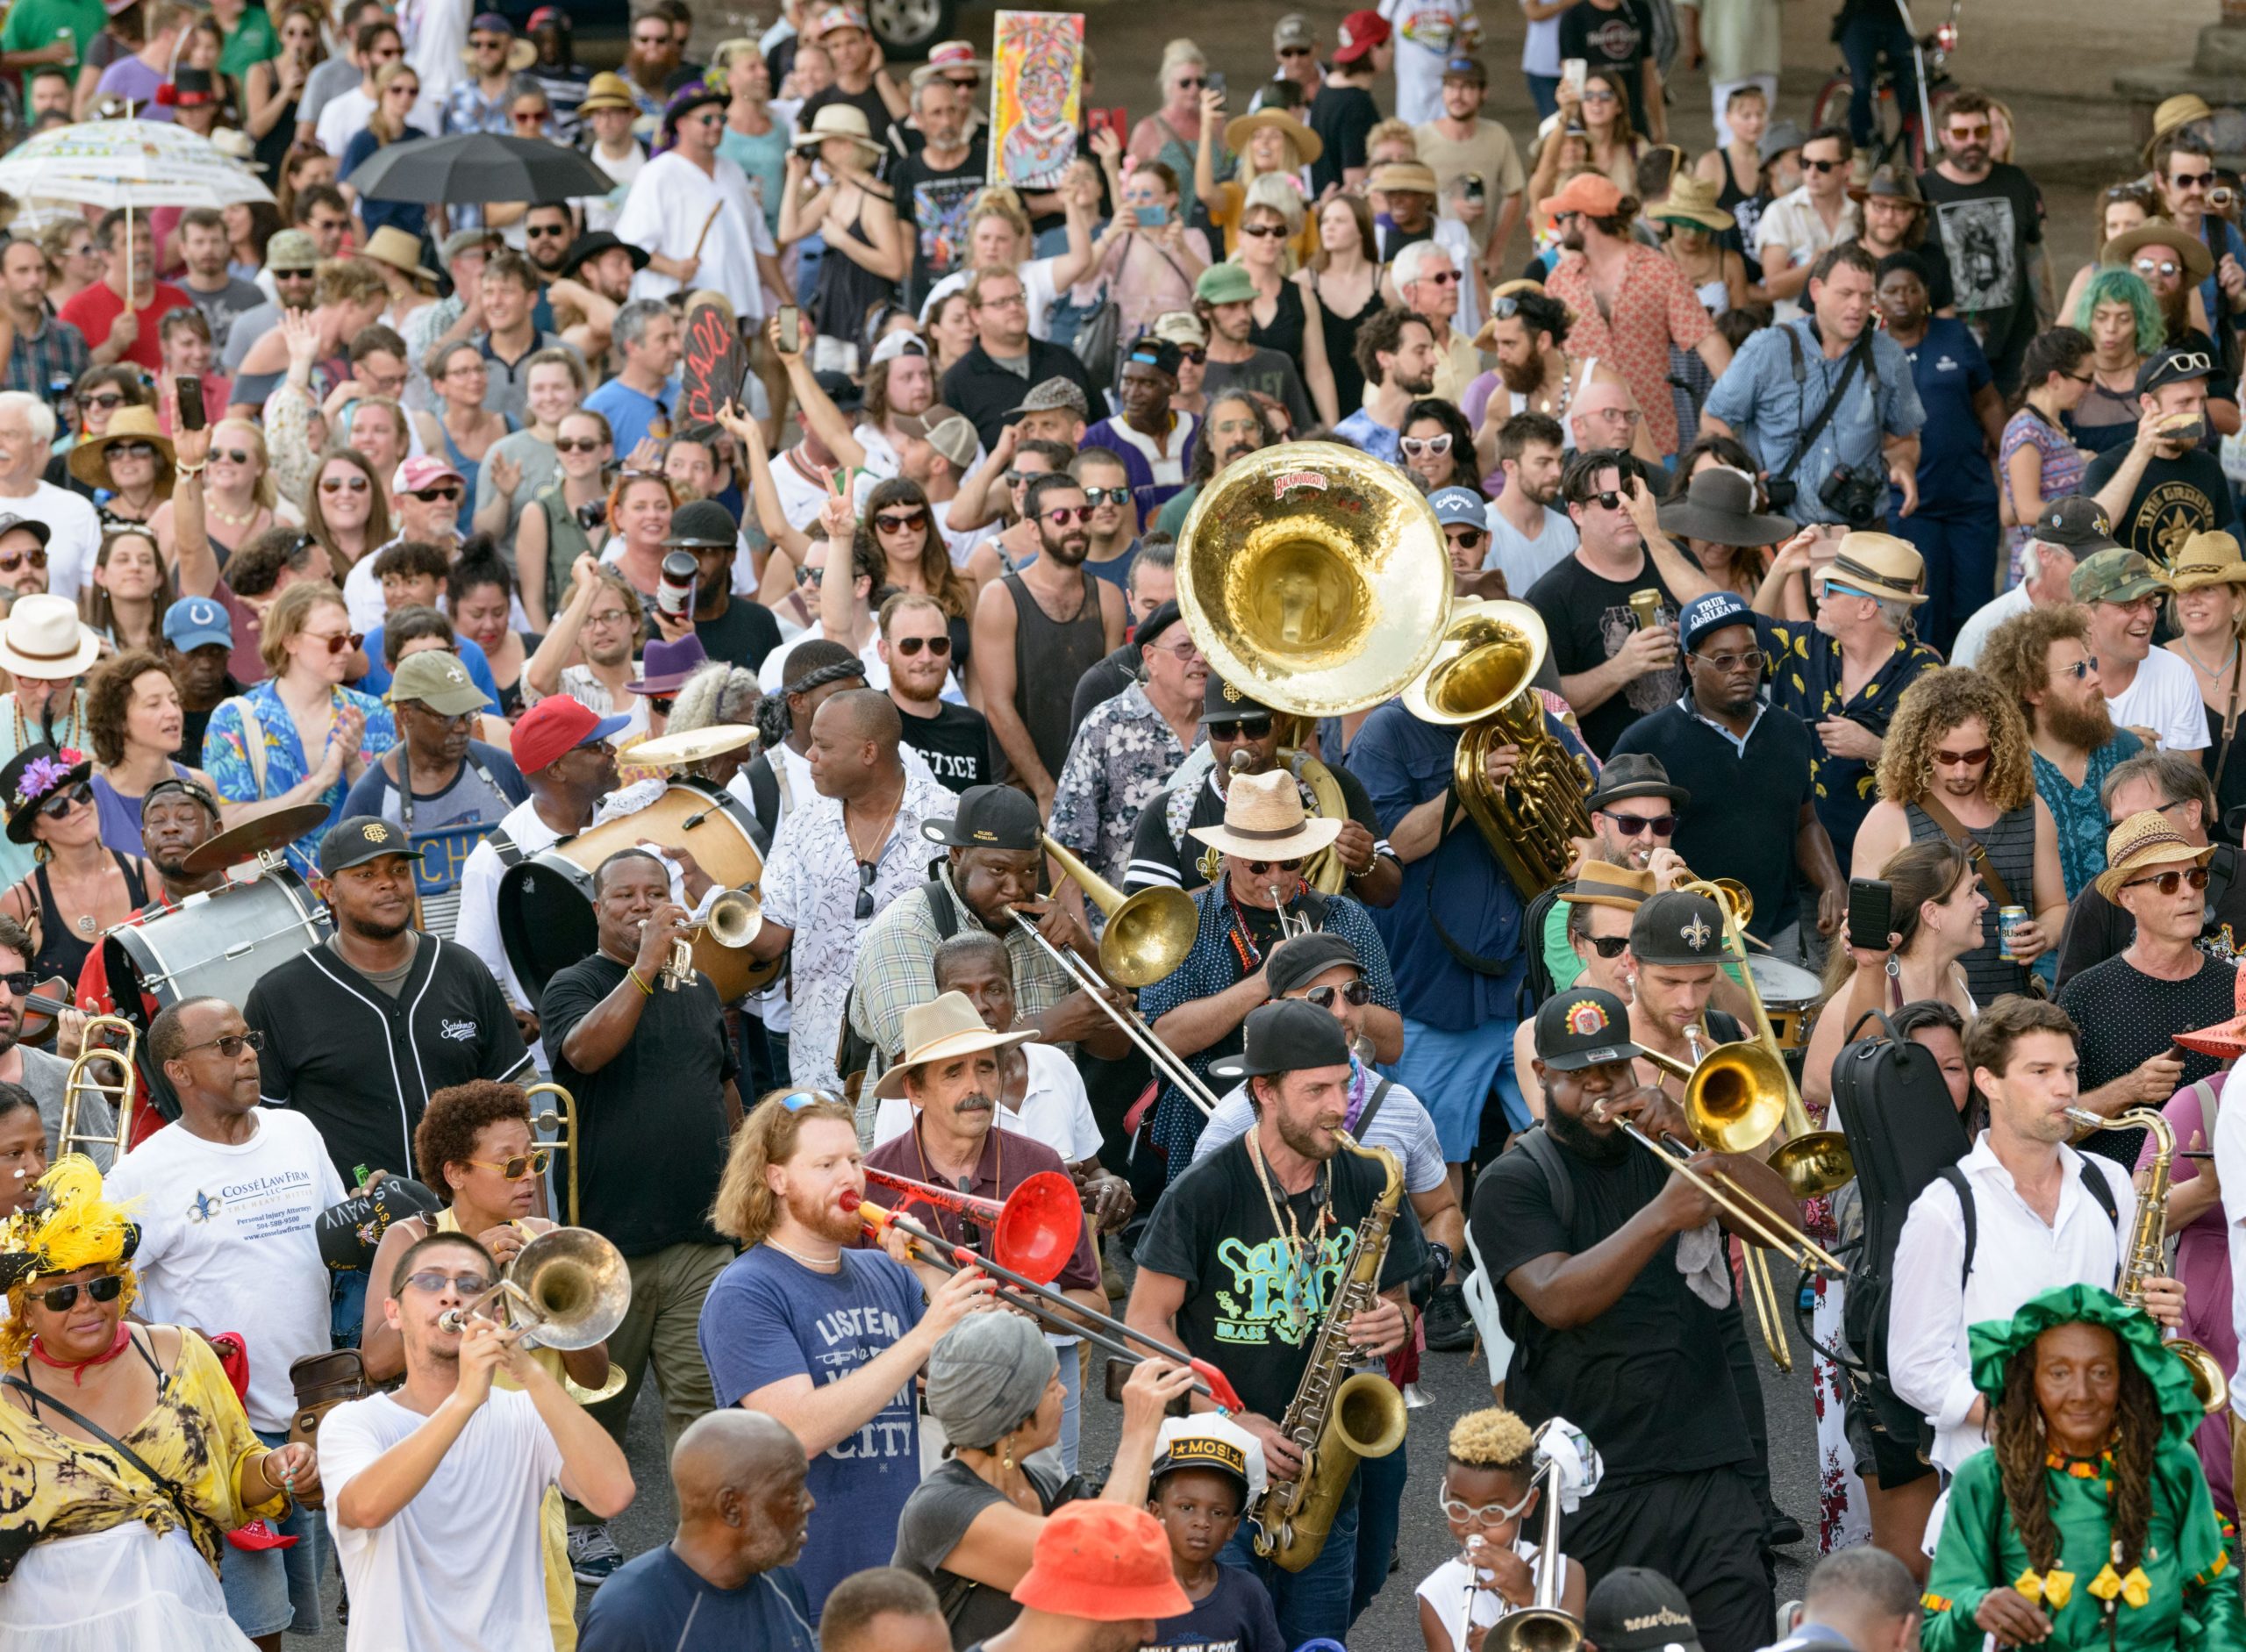 A memorial second line for Dr. John also known as Malcolm John Rebennack (November 20, 1941 – June 6, 2019) takes place in the Treme neighborhood of New Orleans lead by trumpeter James Andrews starting from Ernie K-Doe’s Mother-in-Law Lounge owned by trumpeter Kermit Ruffins in New Orleans, La. Friday, June 7, 2019. Dr. John was a Rock &amp; Roll Hall of Fame musician blending blues, jazz, funk, pop, boogie woogie and rock and roll. Photo by Matthew Hinton